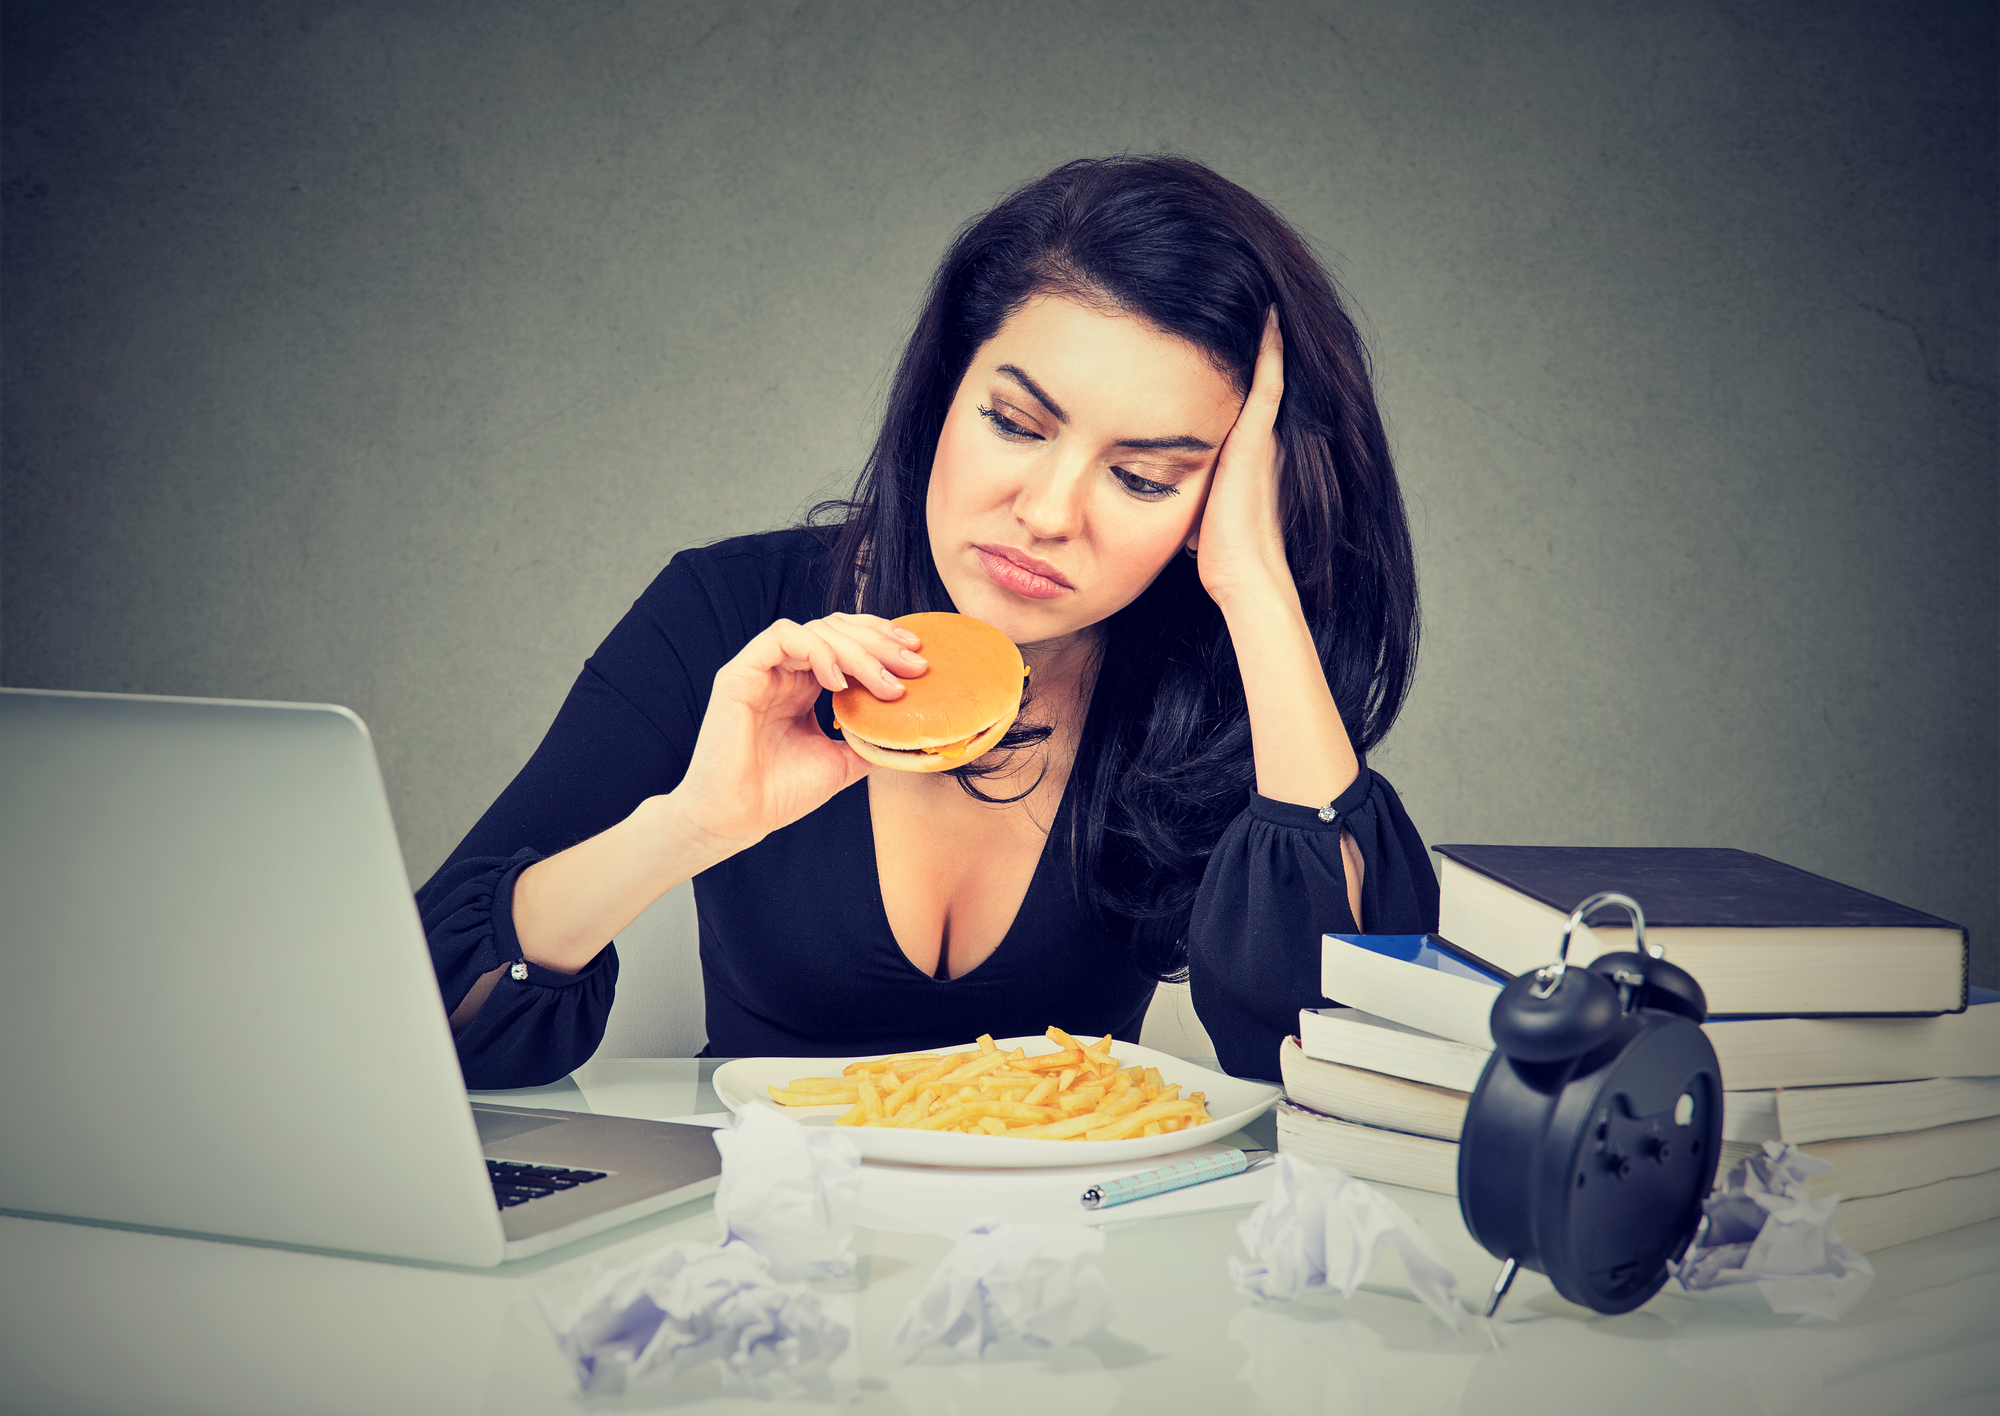 Sedentary lifestyle and junk food concept. Tired stressed woman sitting at her desk eating hamburger and french fries